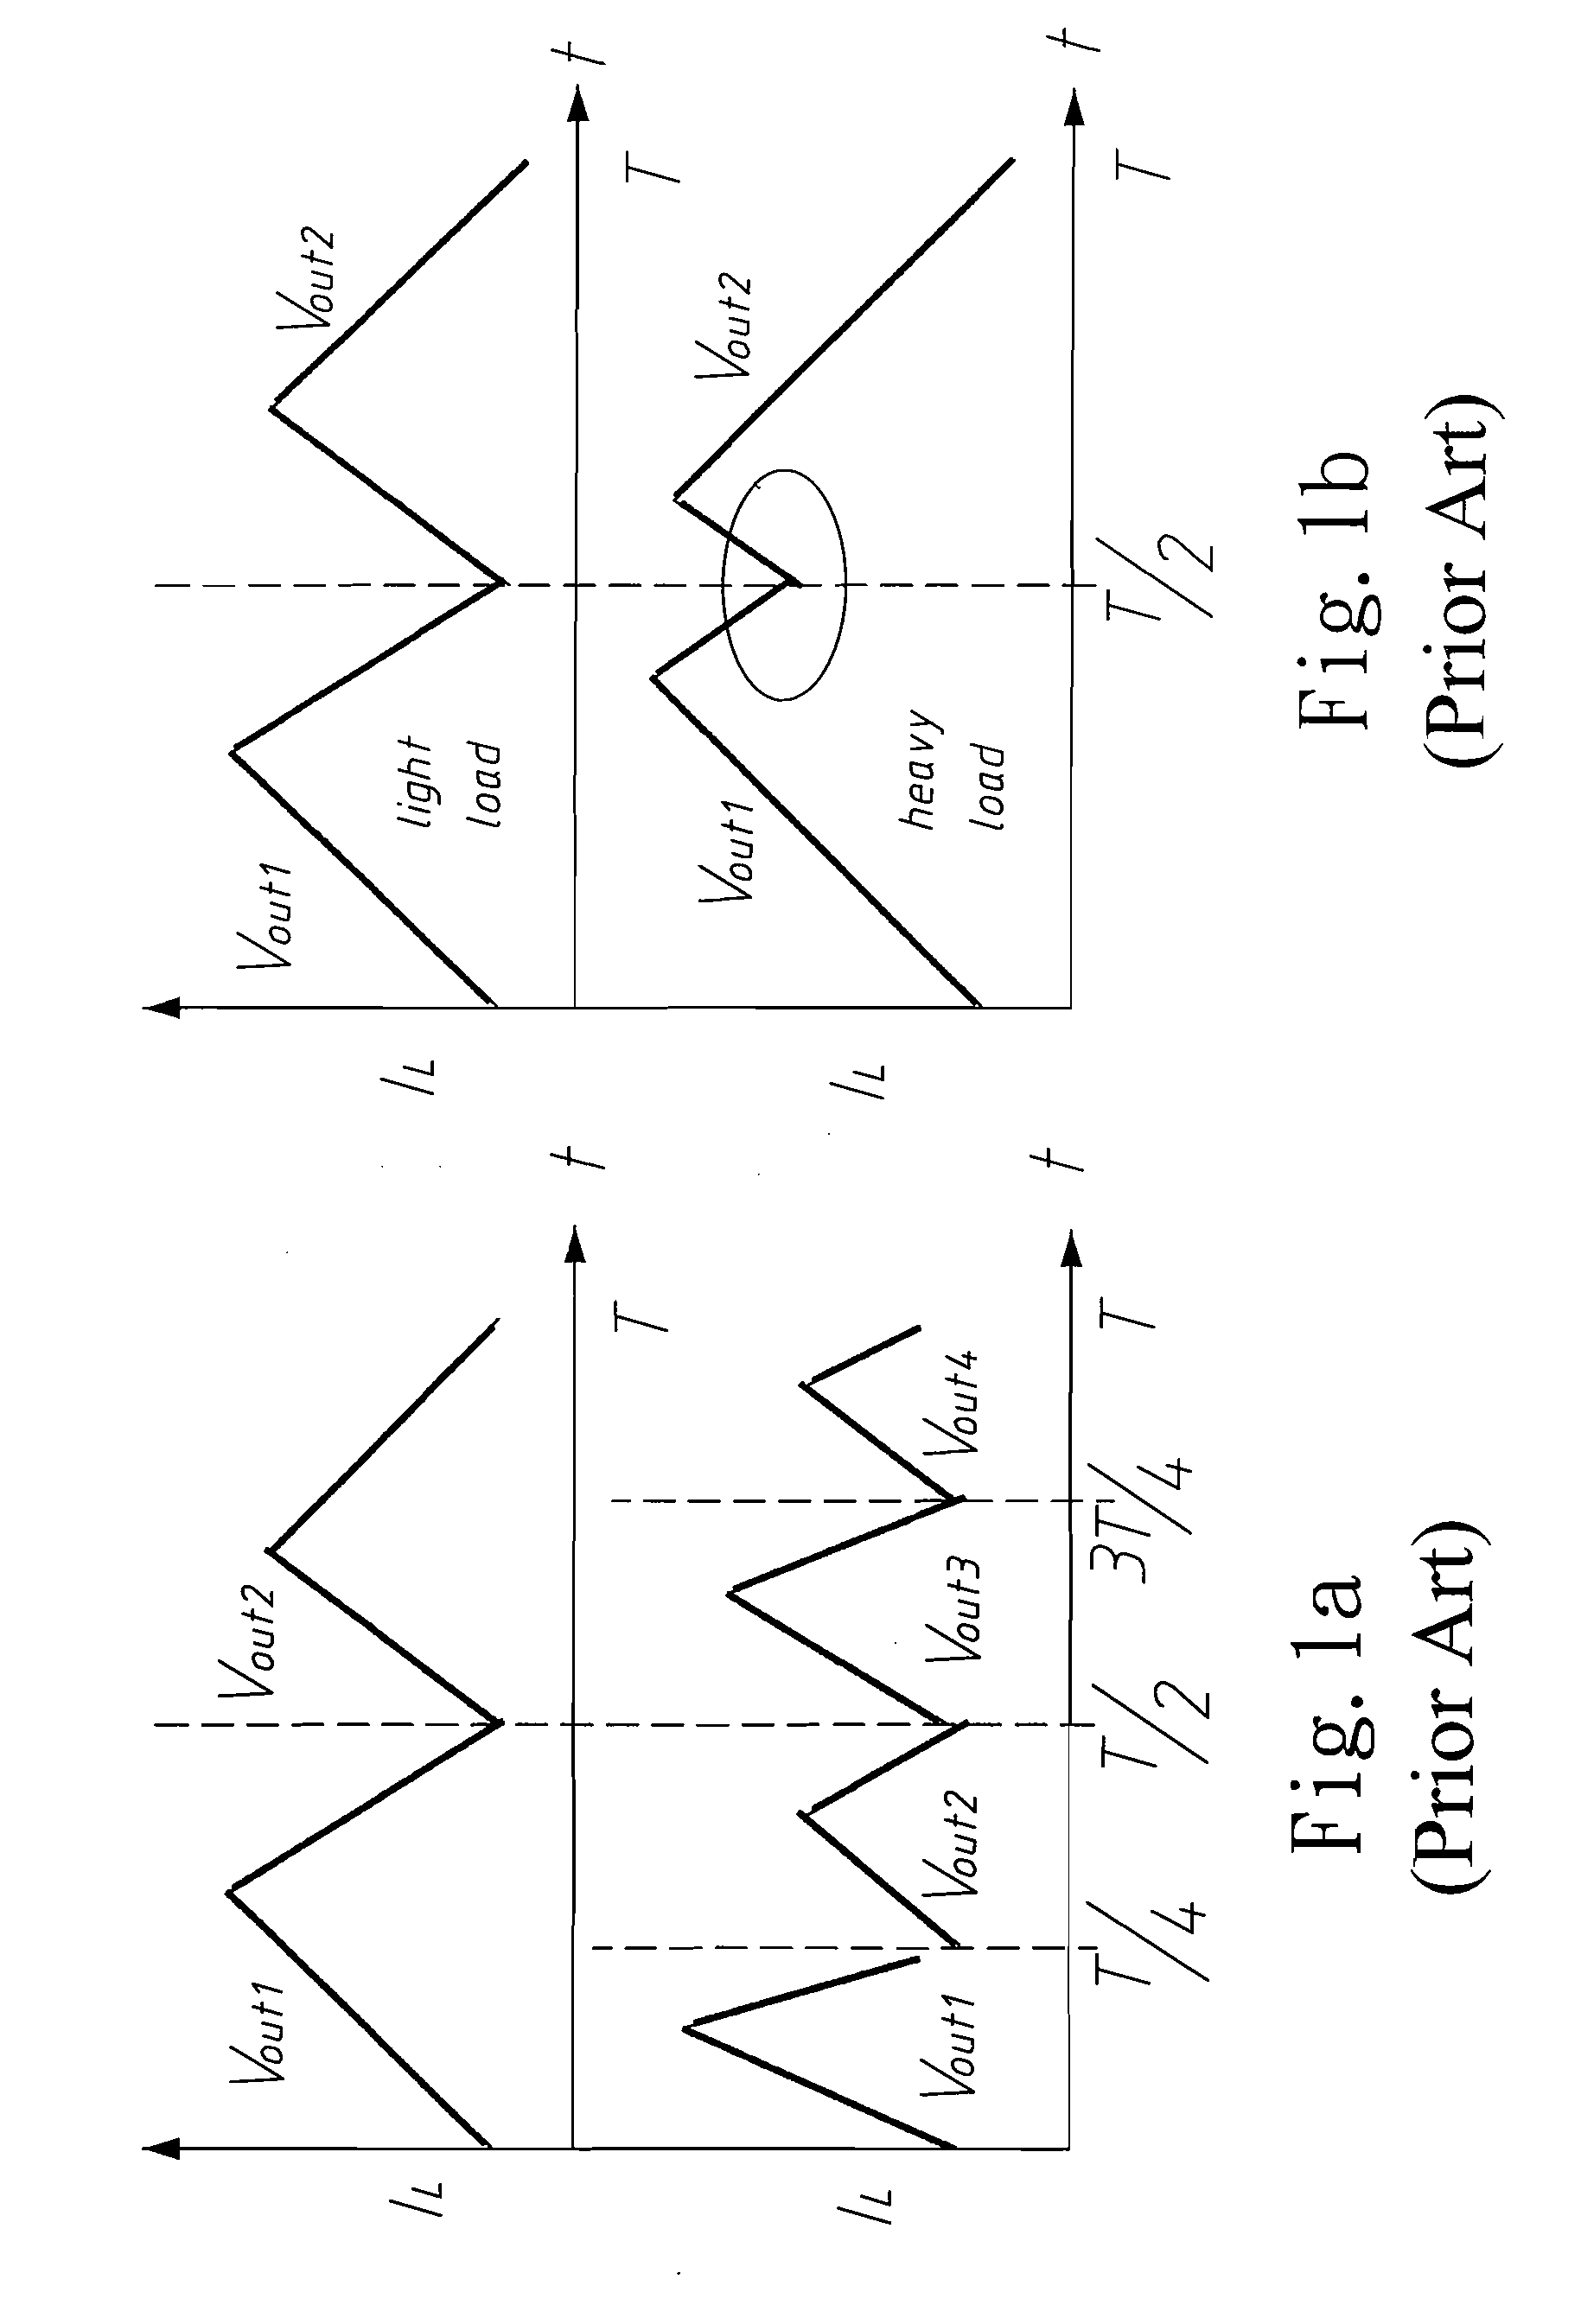 Single inductor multi-output (SIMO) conversion device for enlarging load range